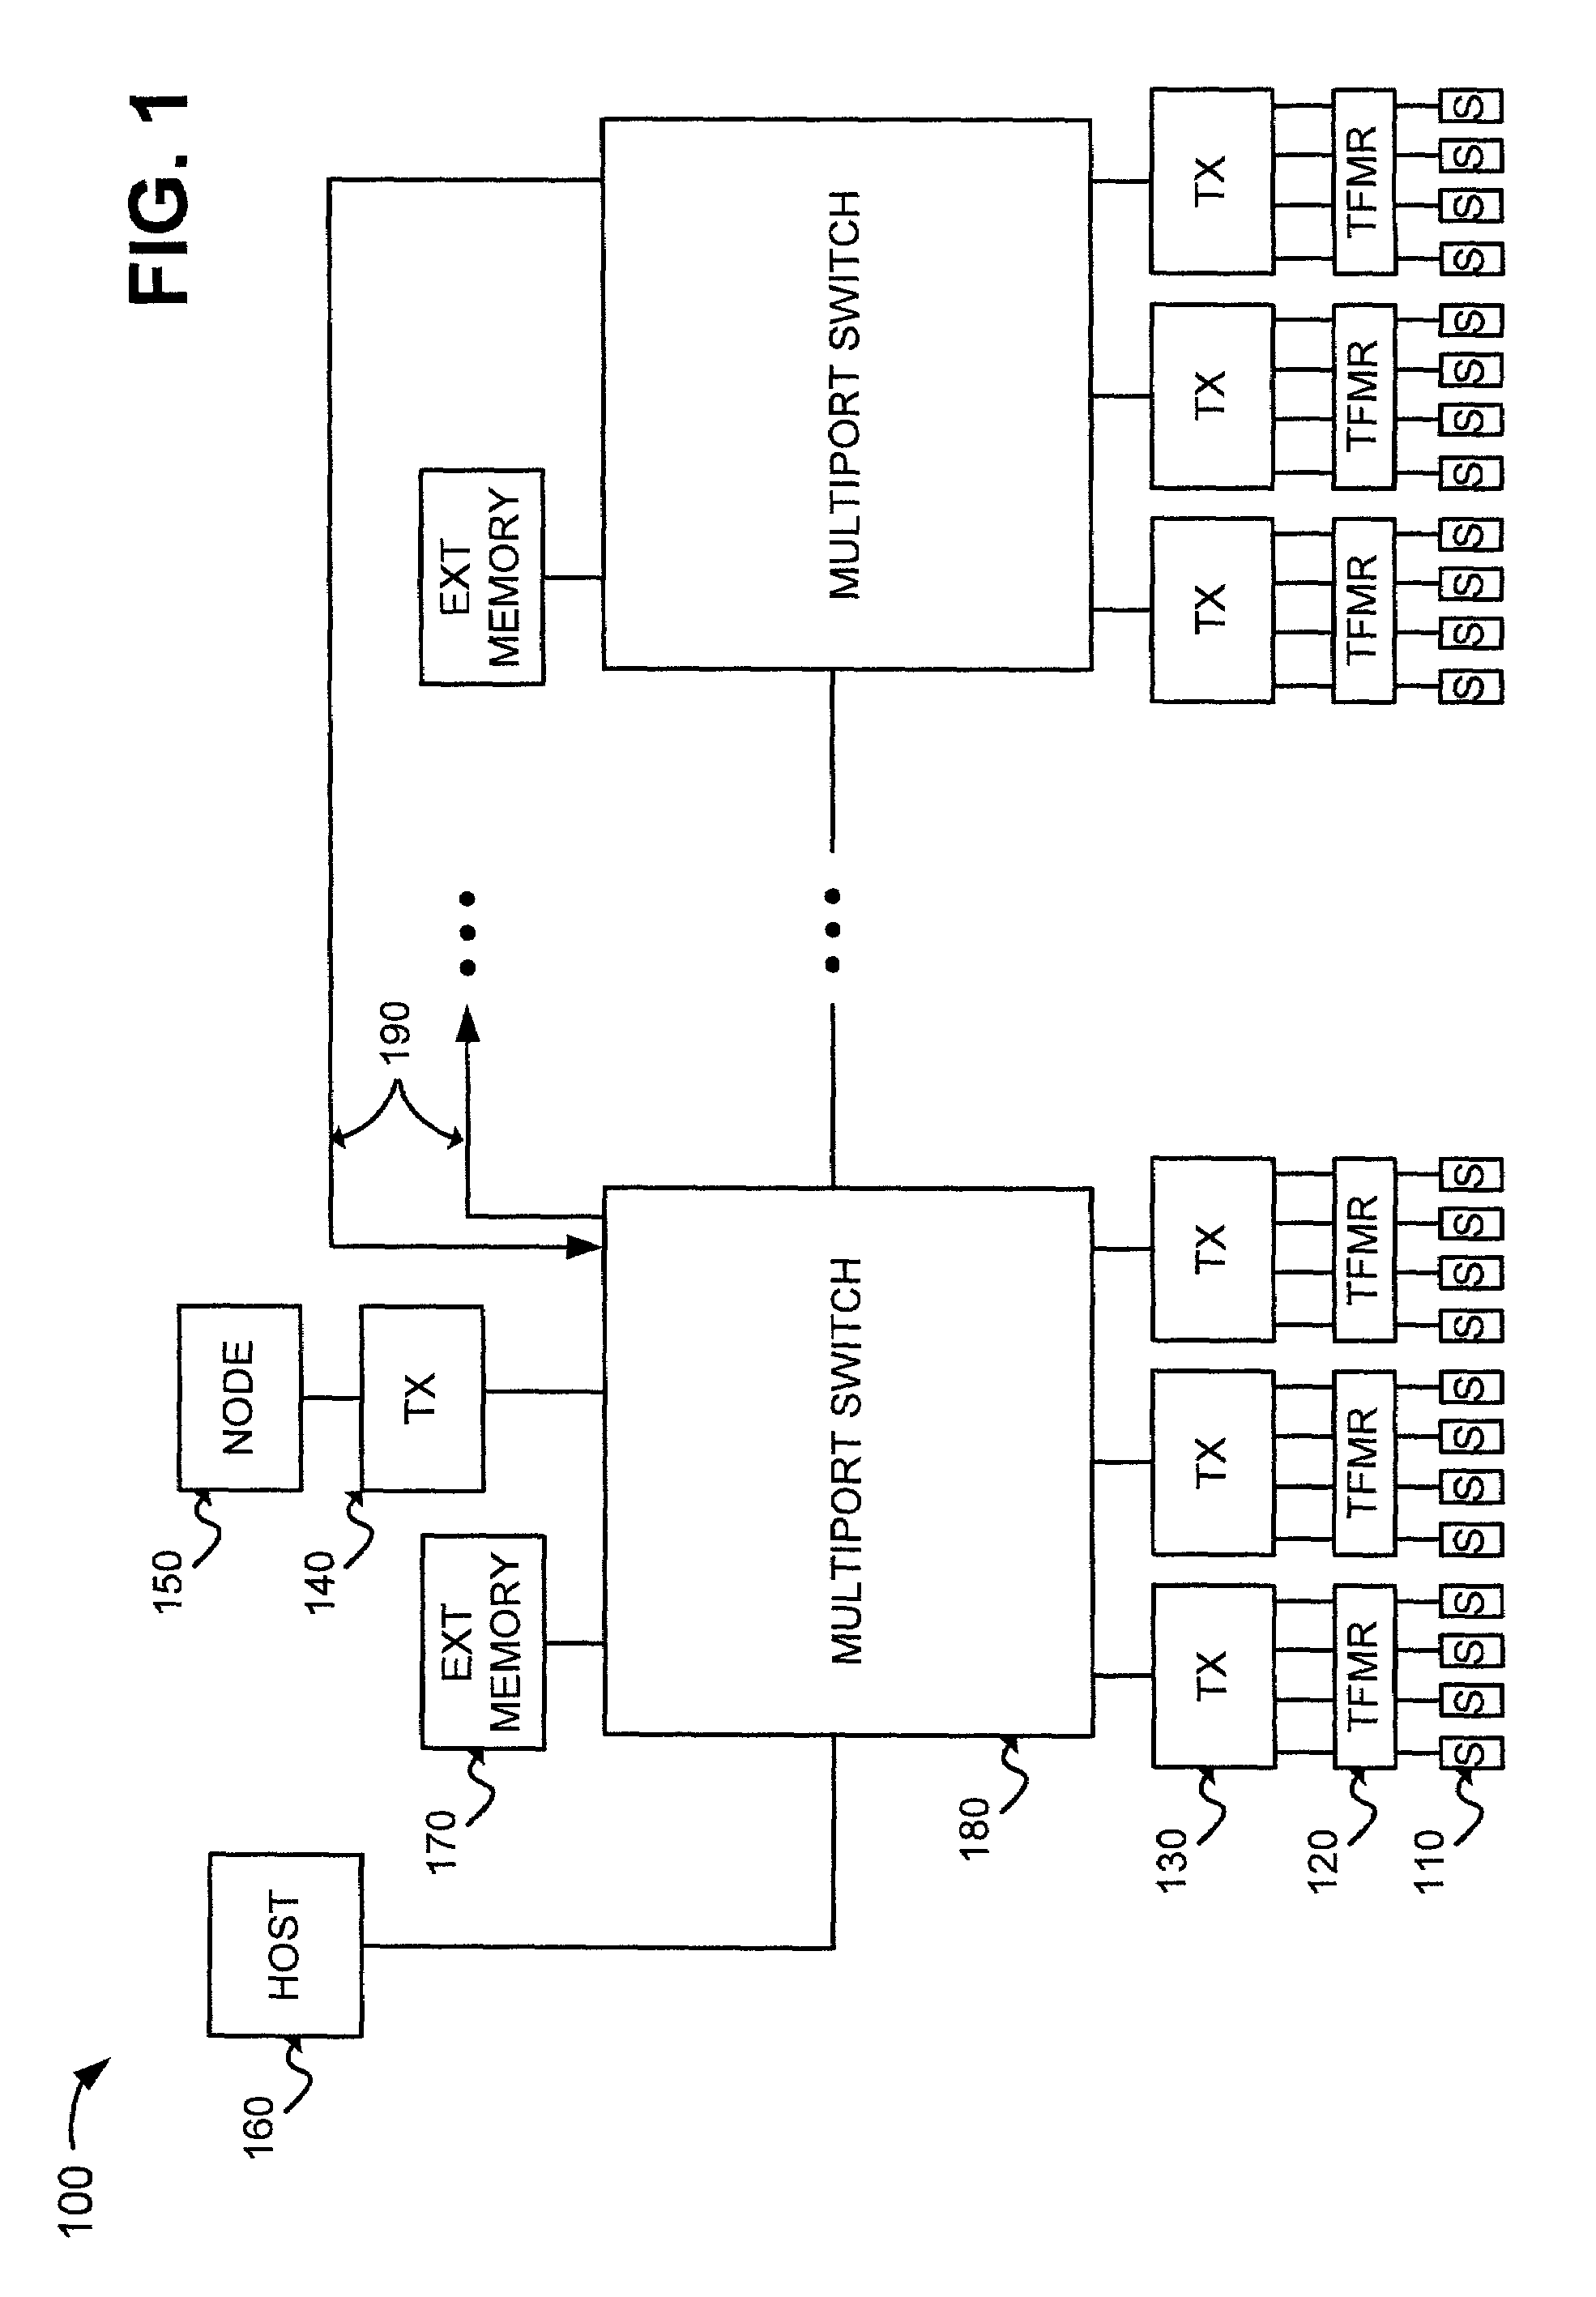 Parallel lookup tables for locating information in a packet switched network